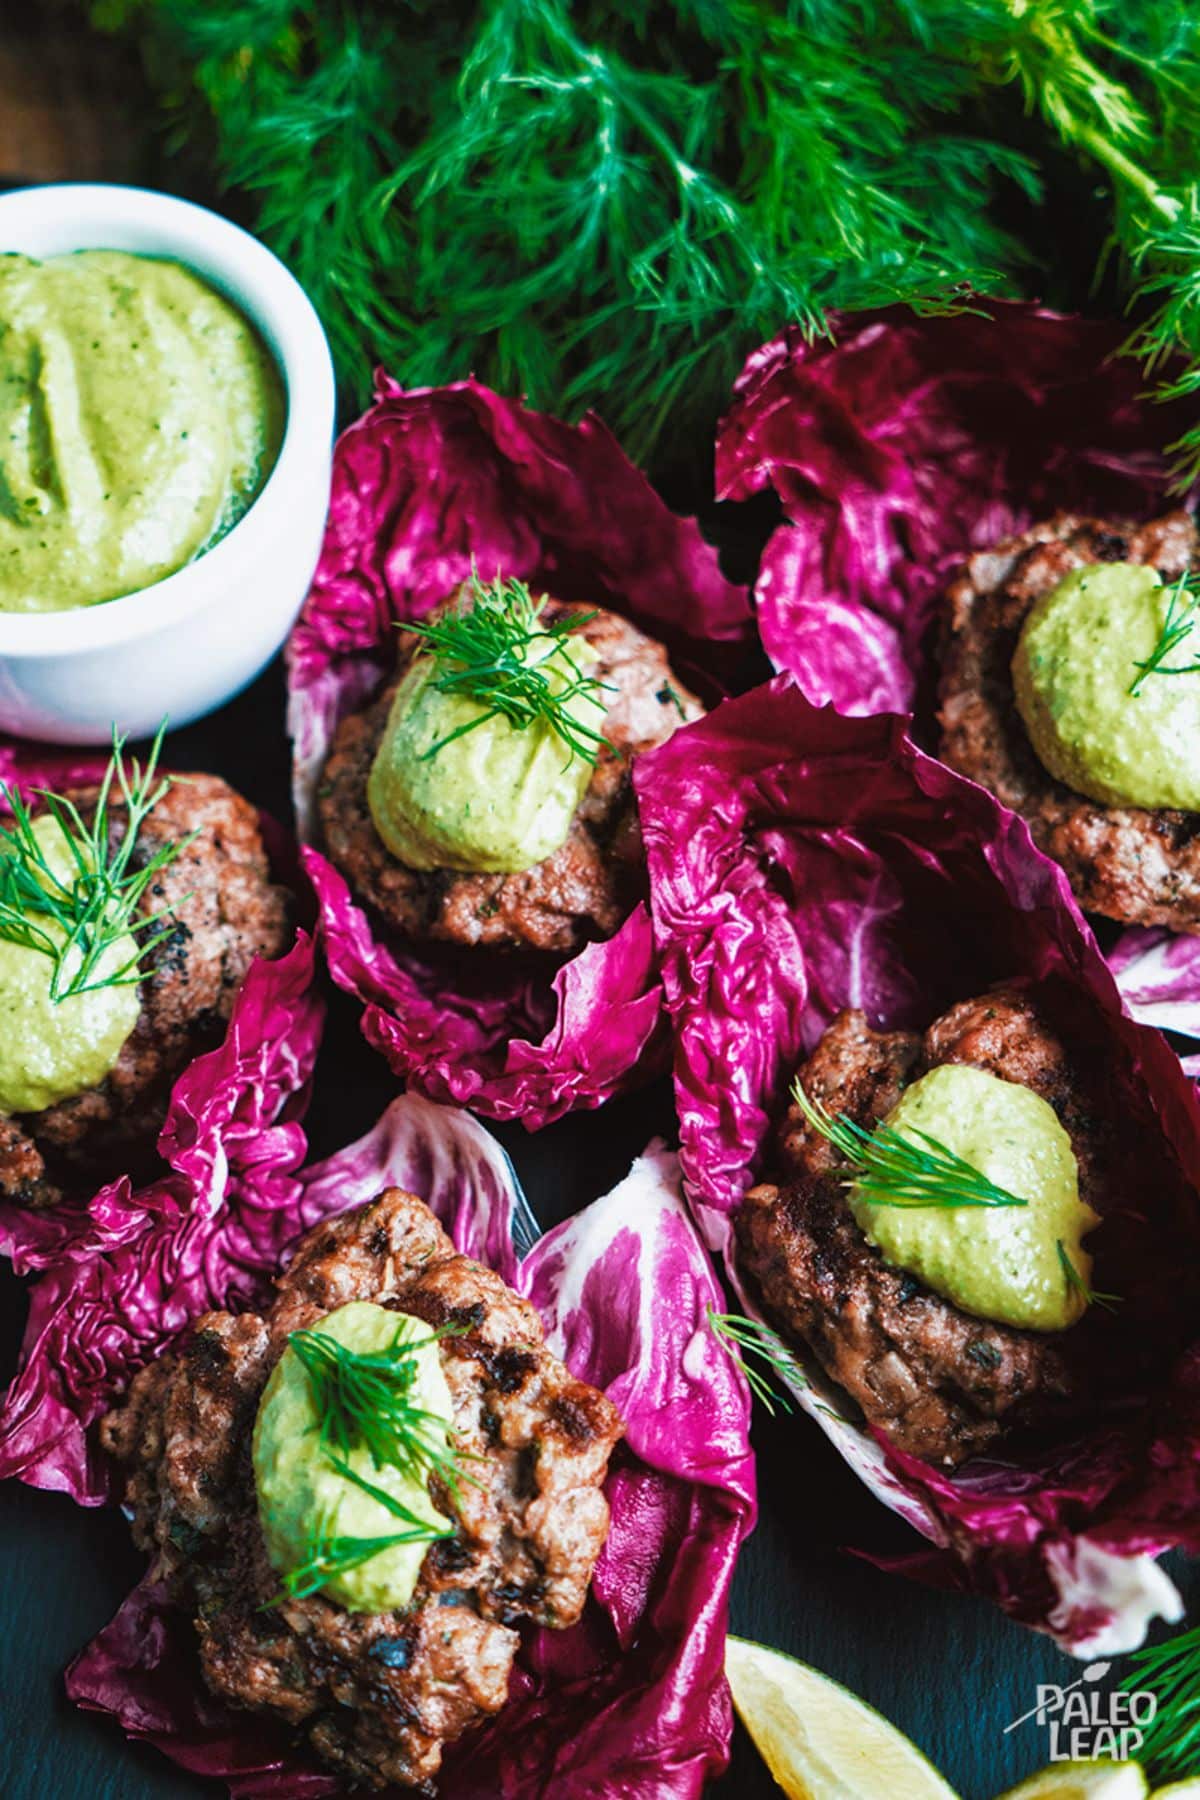 Grilled Lamb Burgers With Avocado Sauce Recipe | Paleo Leap